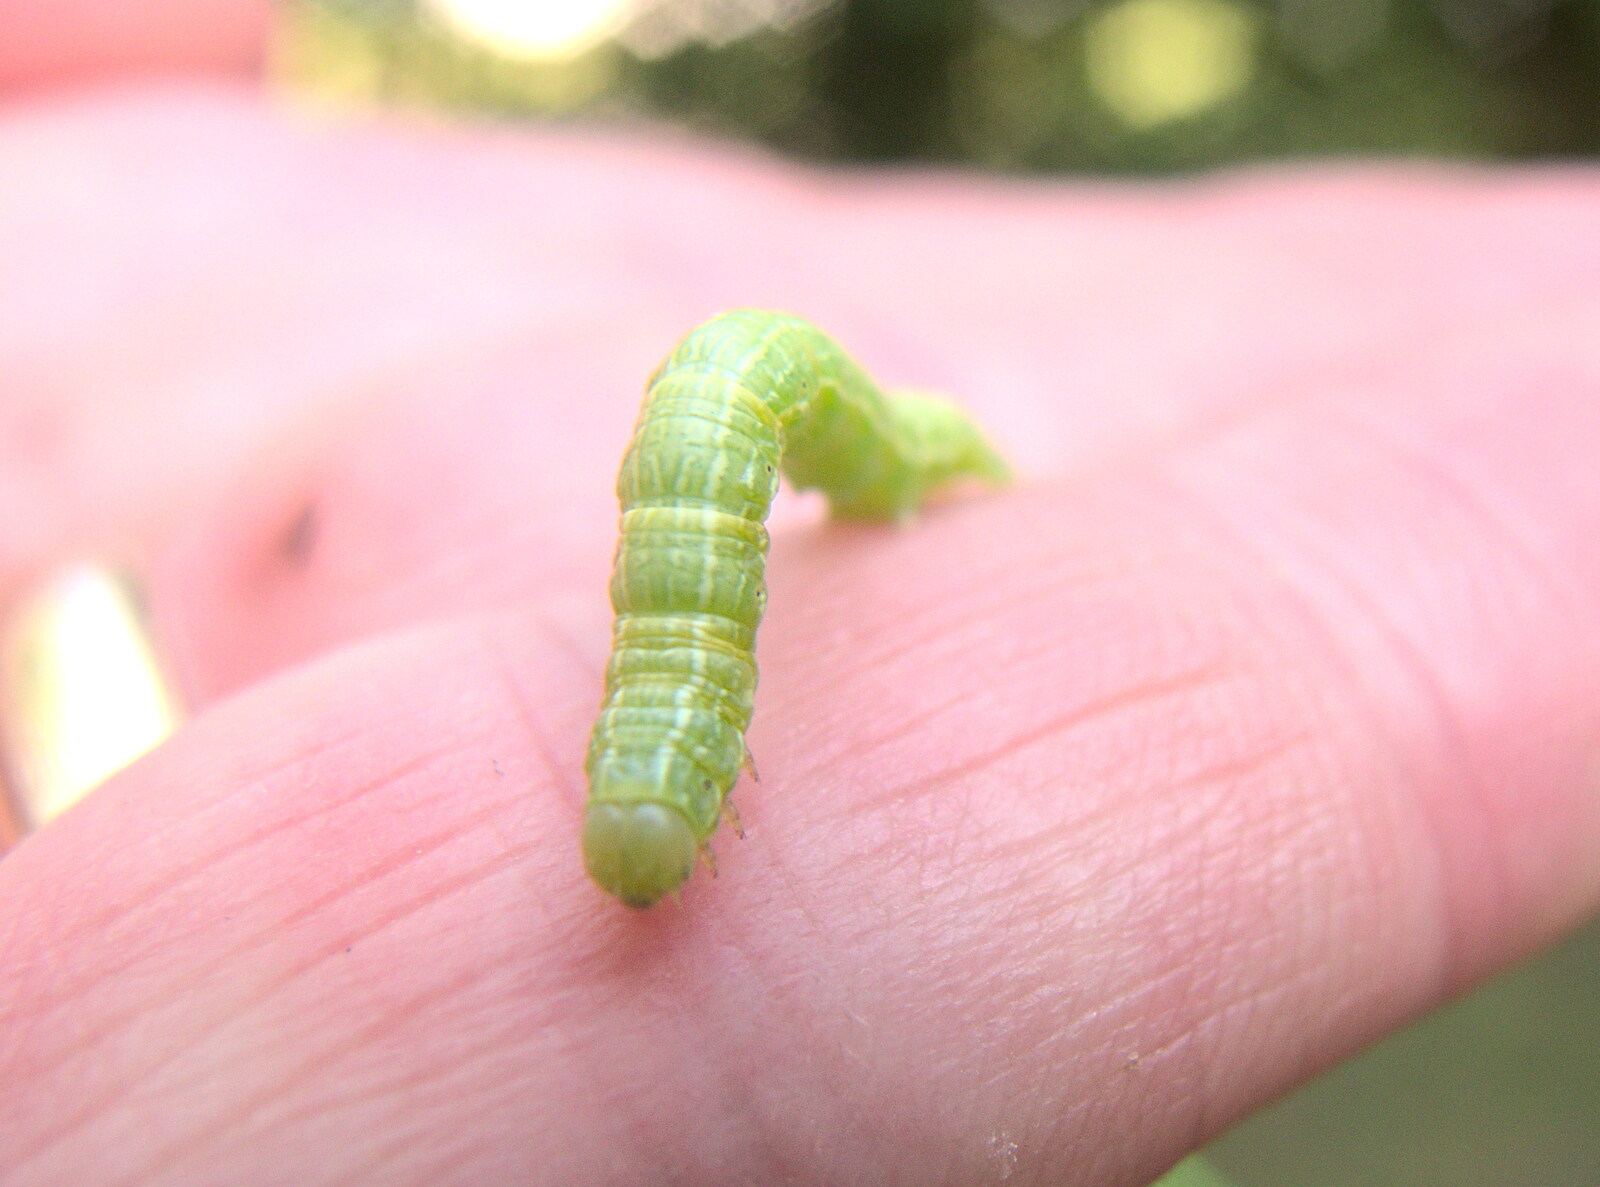 Fred finds a green caterpillar crawling about from Dower House Camping, West Harling, Norfolk - 27th May 2018